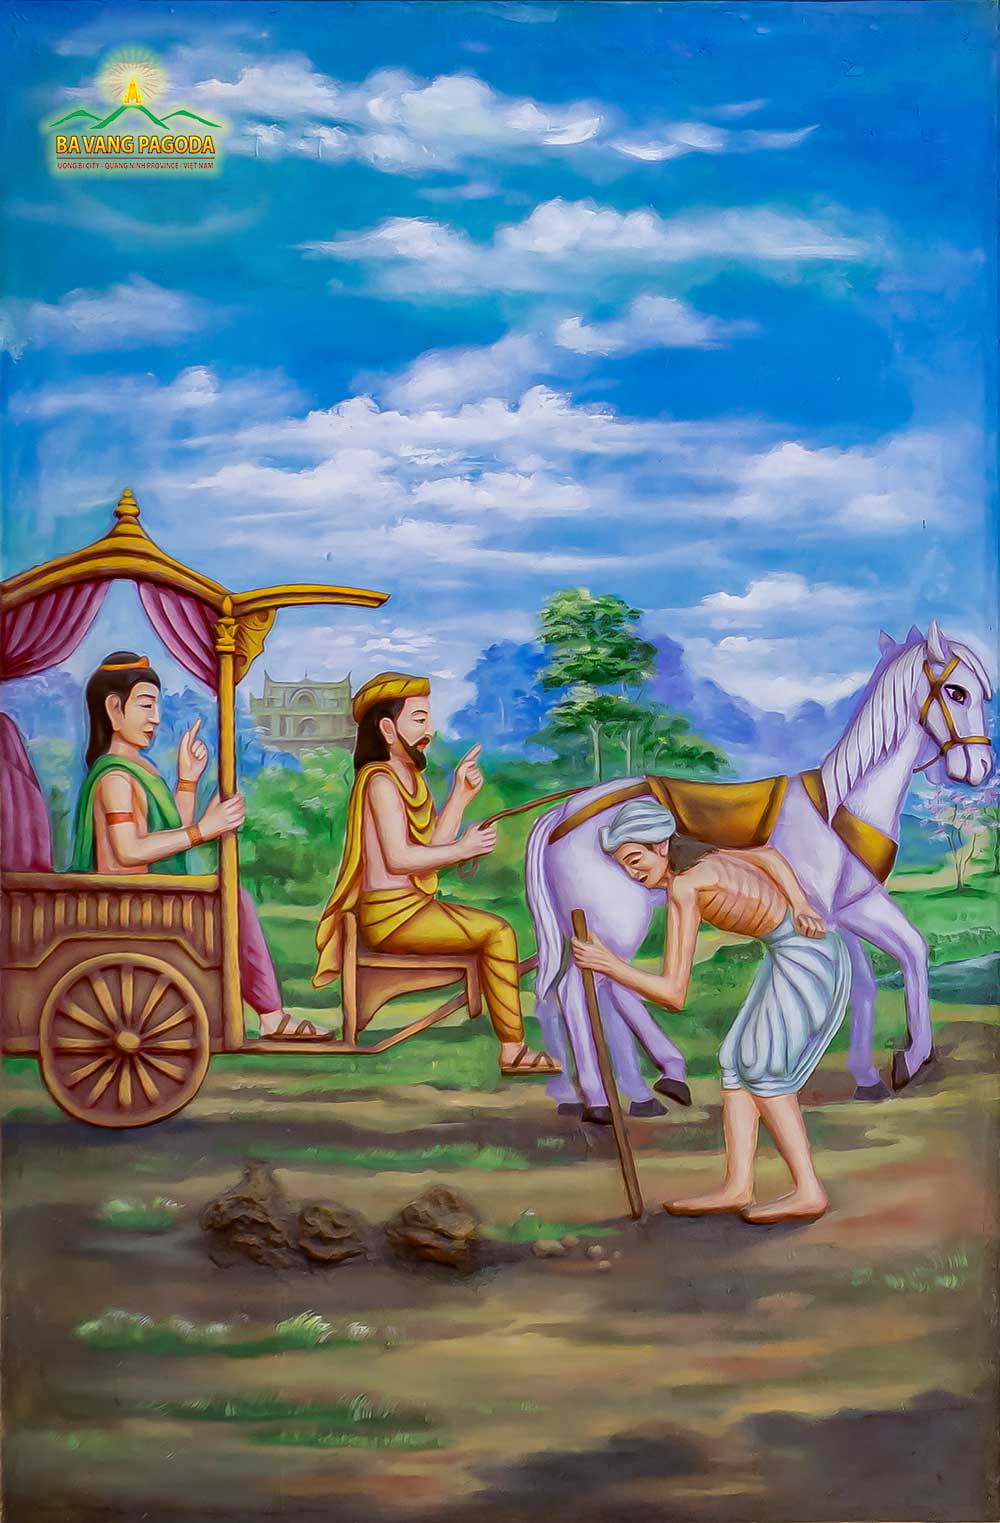 The first time Prince Siddhartha ventured out of the palace, he saw an old man.